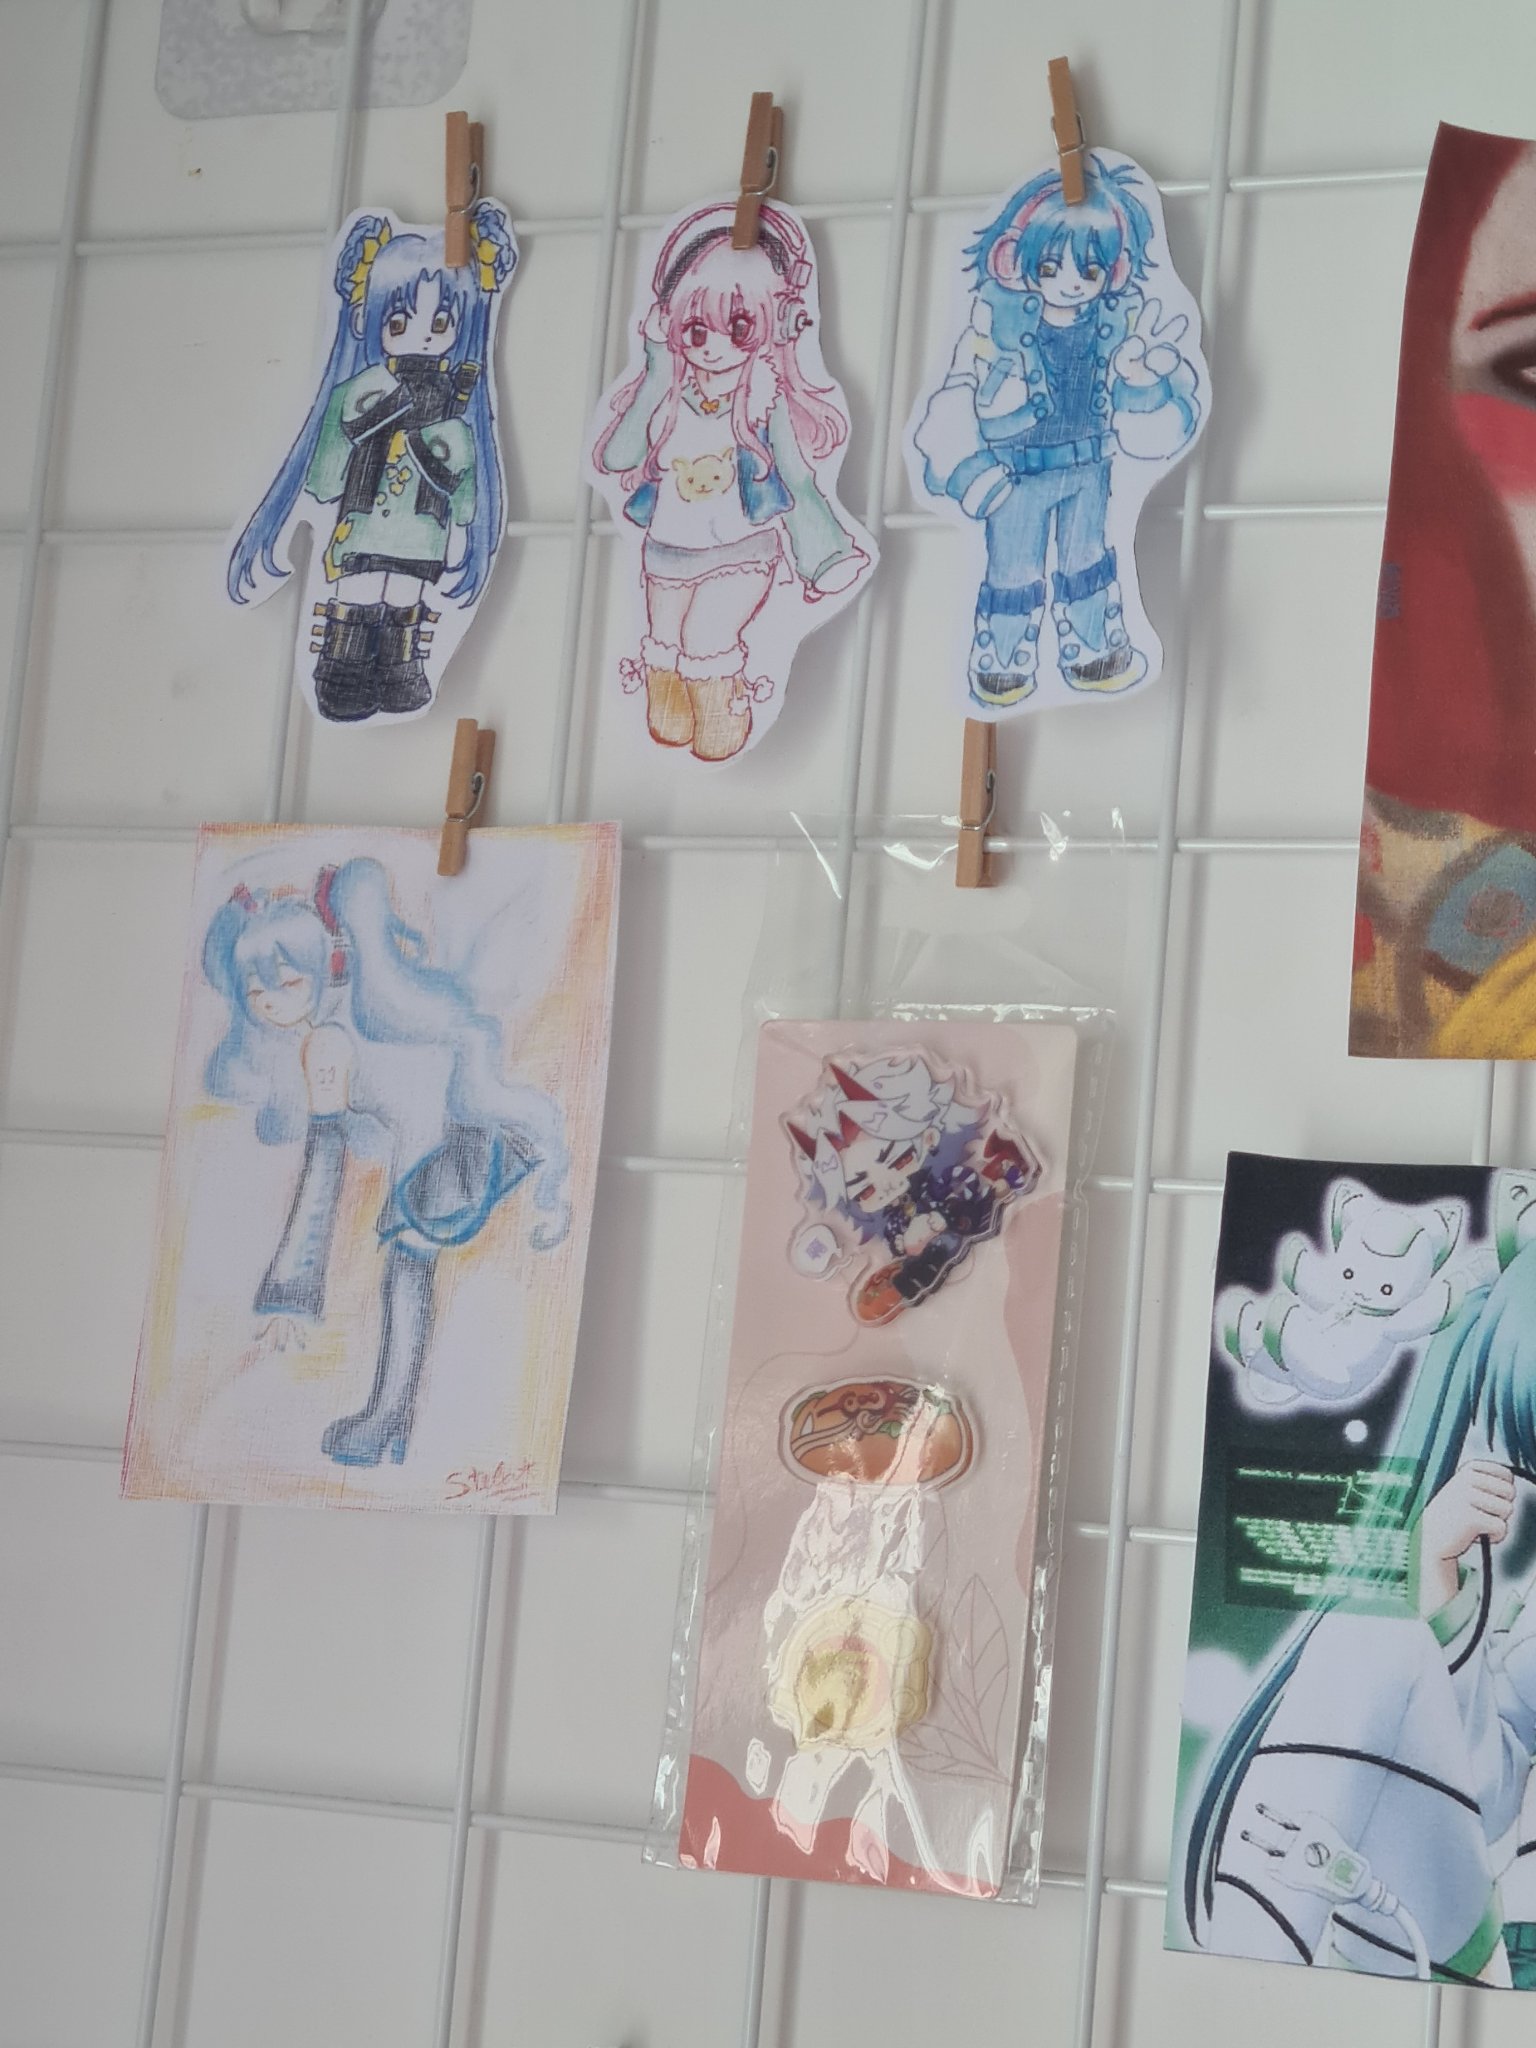 picture of 4 drawings of, from left to right, kong ruili, super
            sonico, seragaki aoba and hatsune miku, made with coloring pencils and pens, besides a small package of pins of arataki itto.